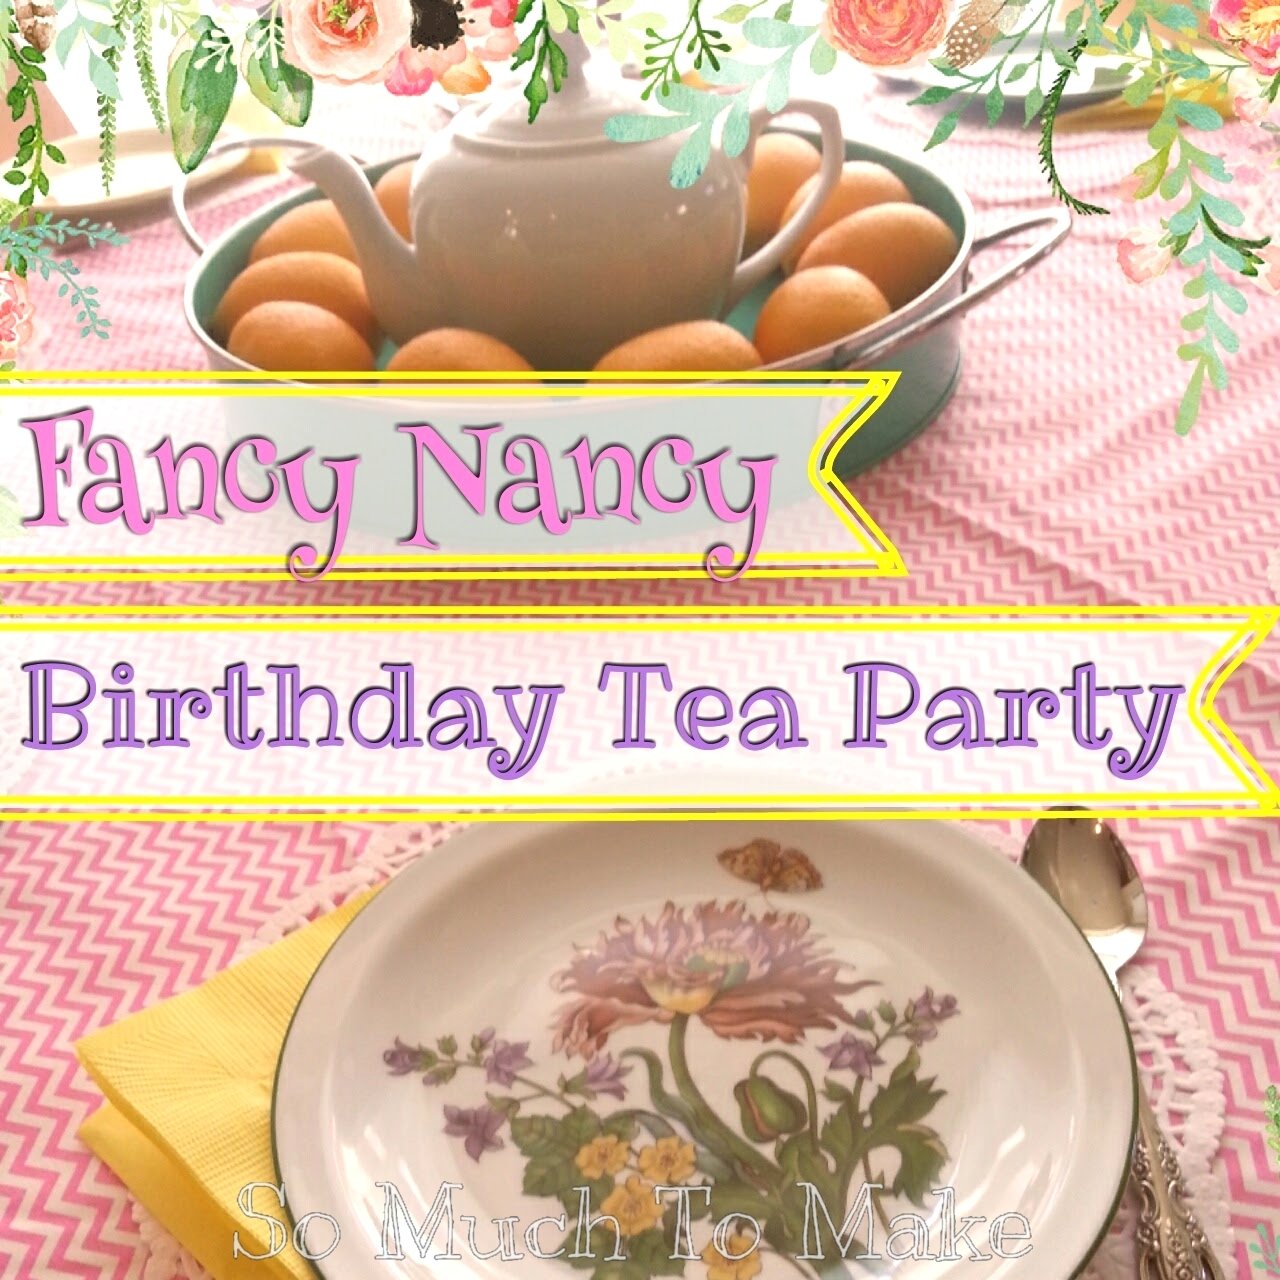 10 Attractive Fancy Nancy Tea Party Ideas fancy nancy inspired birthday tea party so much to make 2023